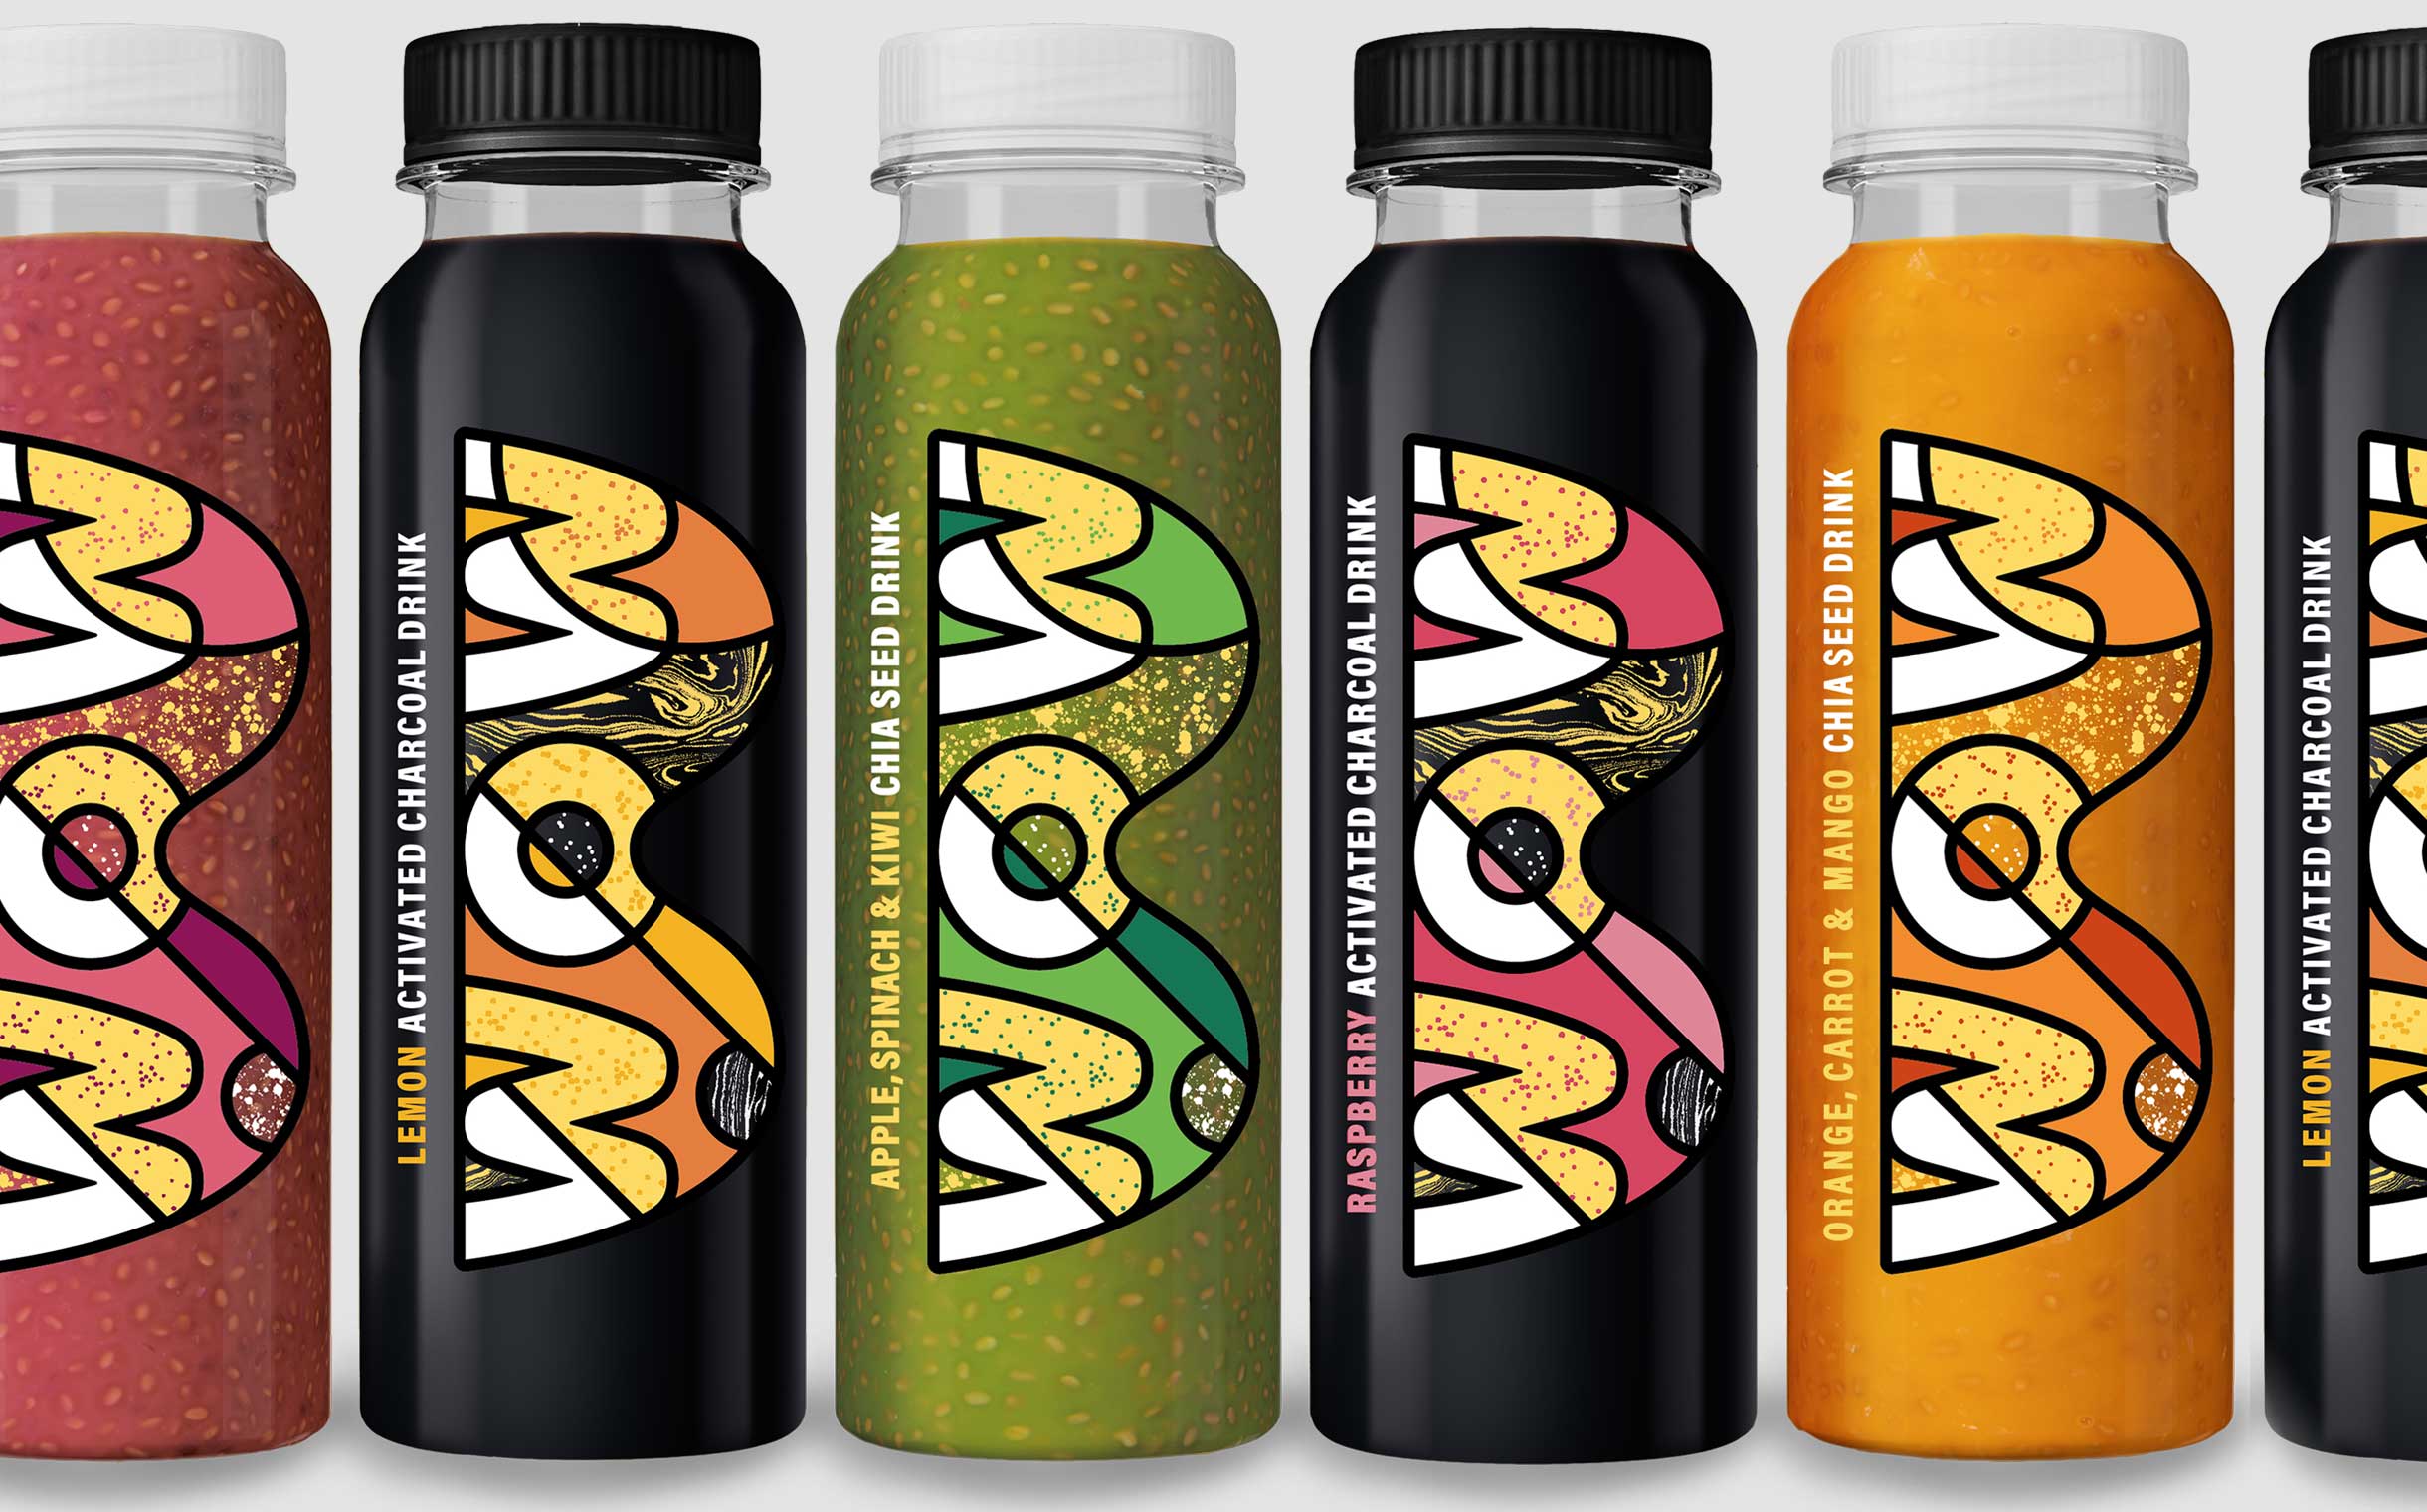 Functional beverage brand Wow unveils bold new pack design